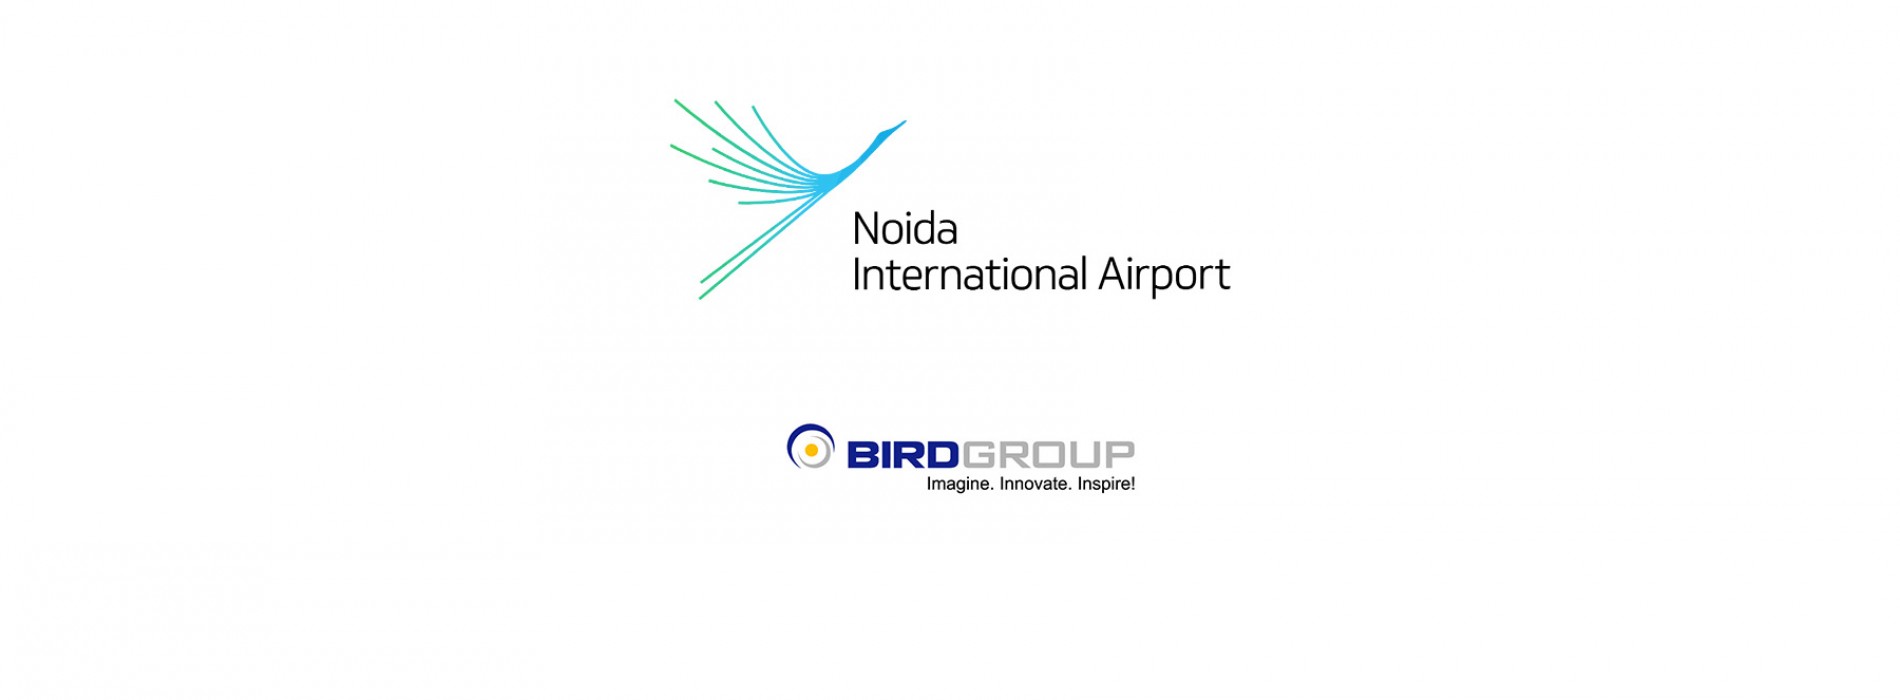 Noida International Airport selects Bird Group for ground handling services